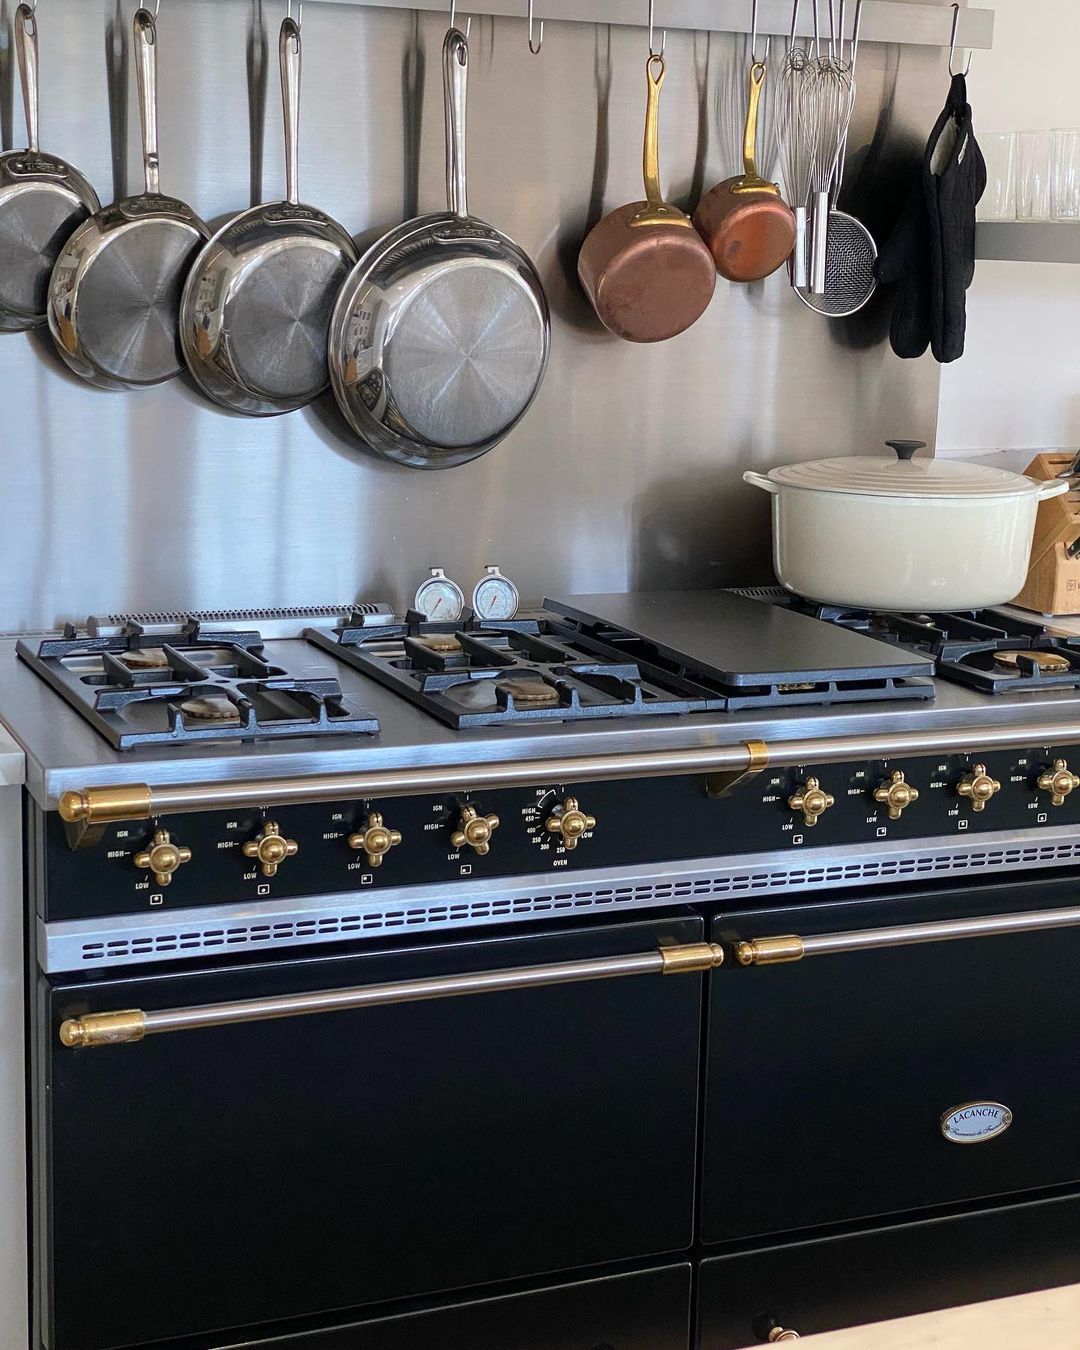 Ina Garten’s New Kitchen Renovation Is Just as Dreamy as We Imagined—Take a Peek